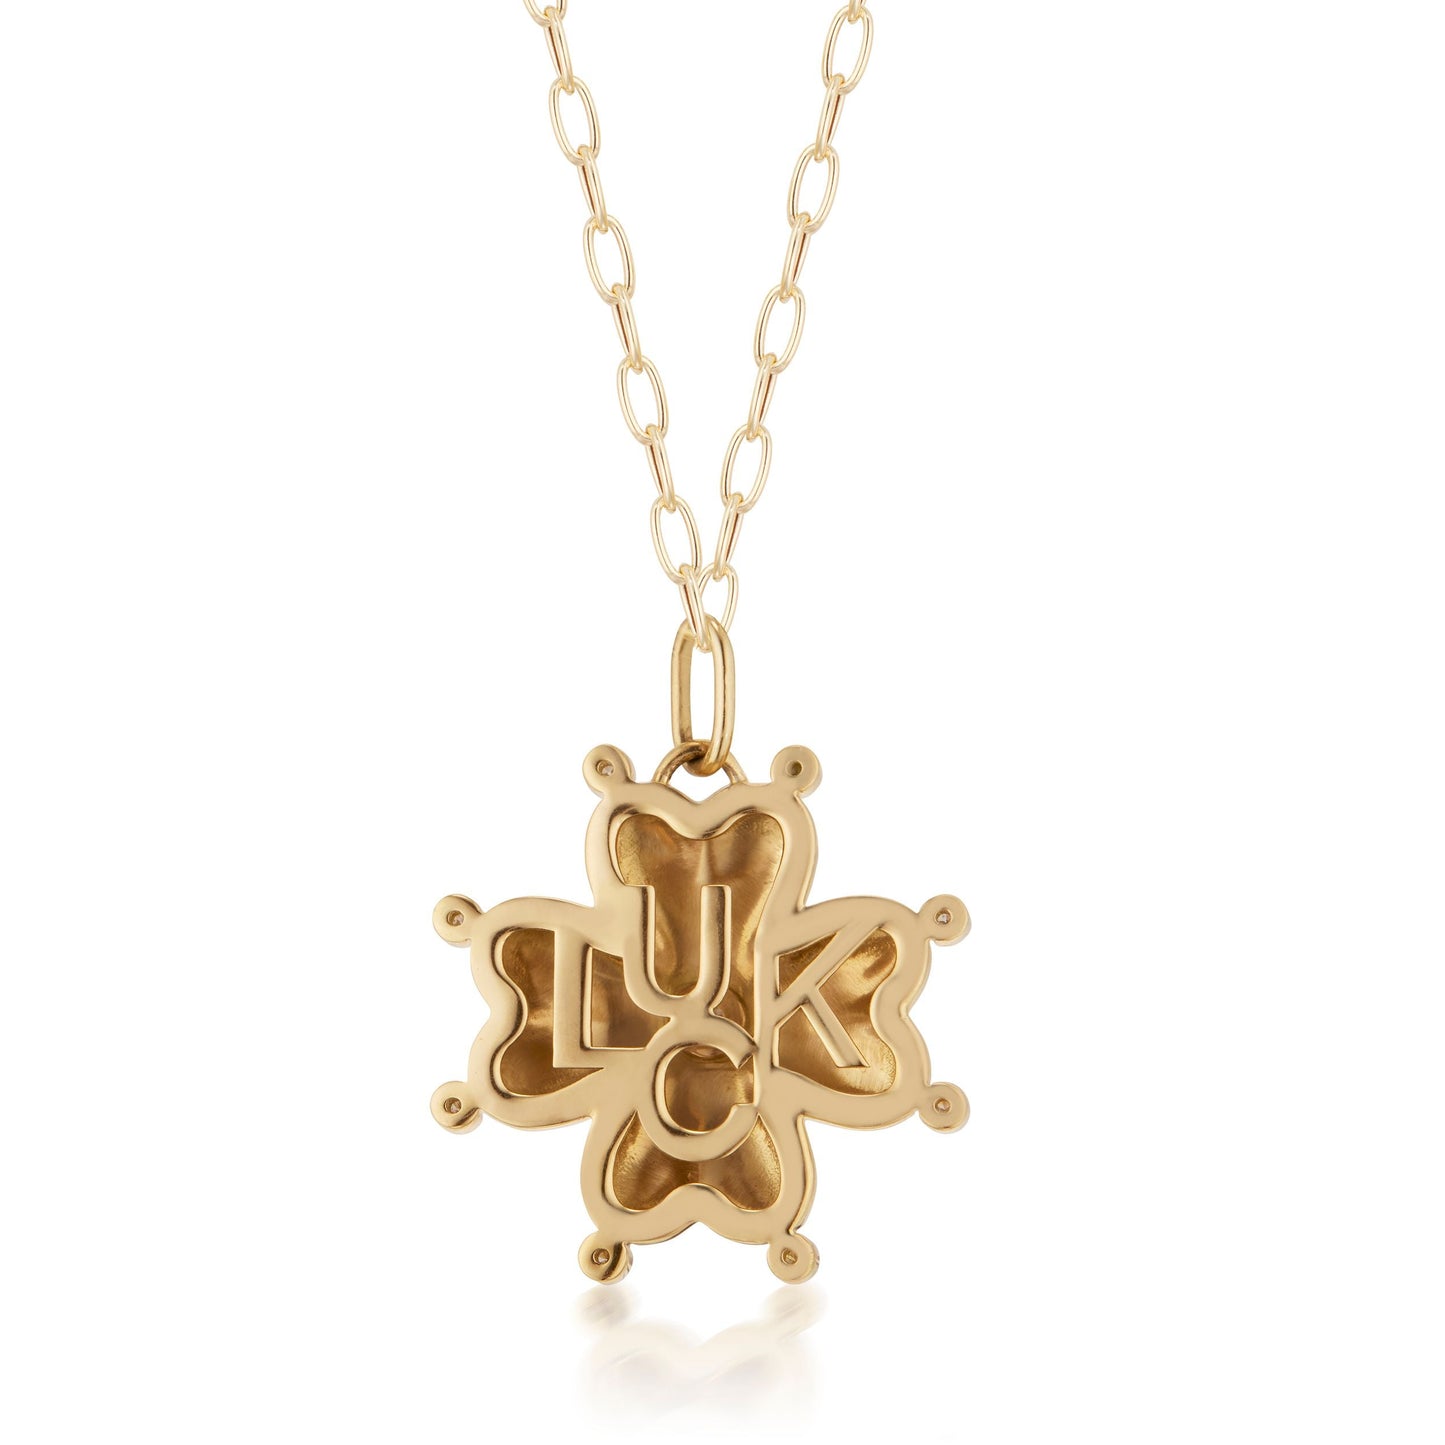 Puff Clover Luck Pendant Necklace with Diamonds